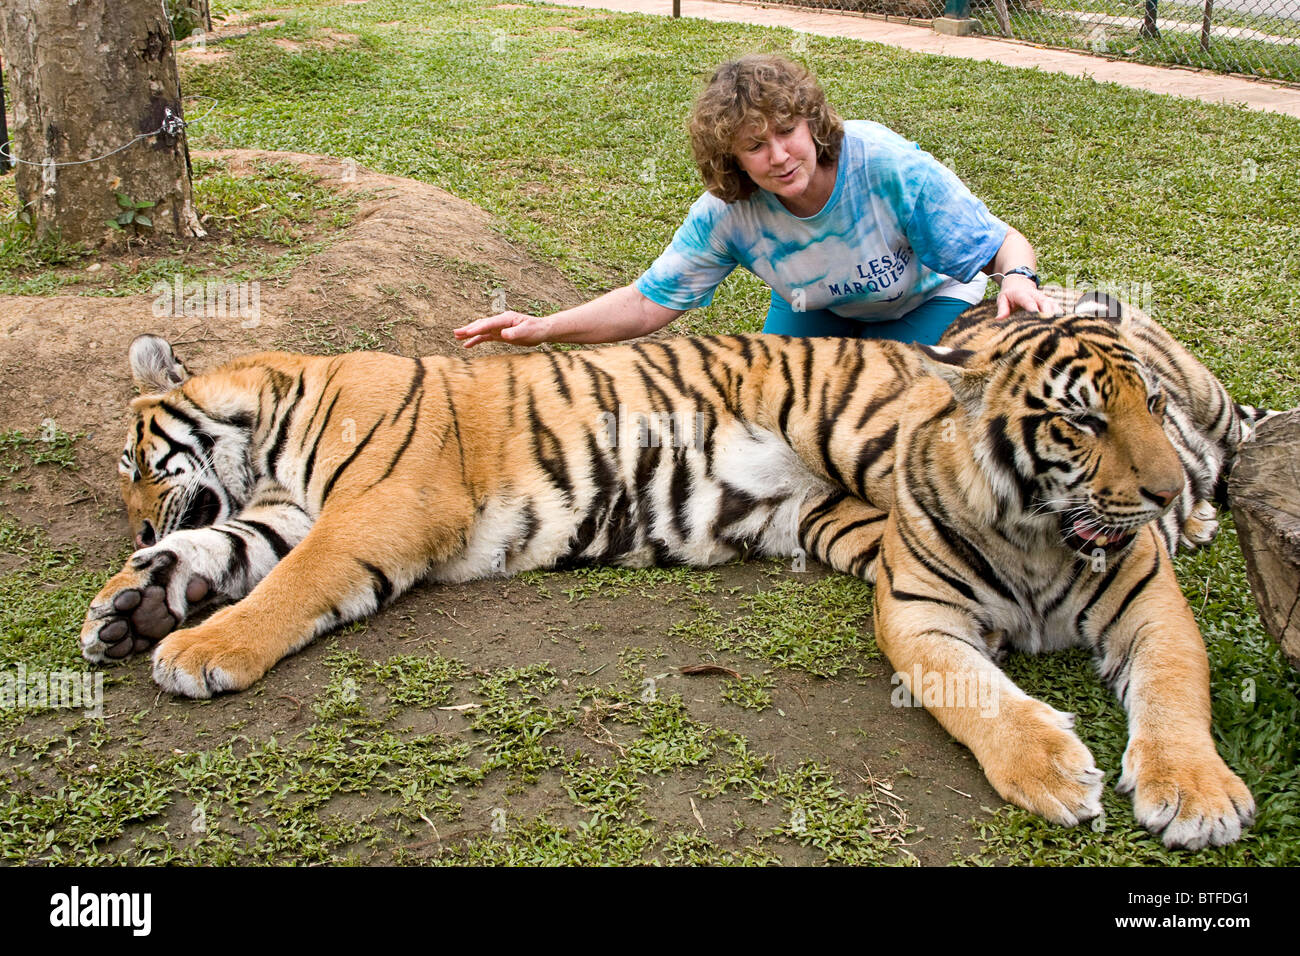 Visiting tourists hug, pet and scratch tigers under close supervision of trainers at Tiger Kingdom in Chiang Mai, Thailand. Stock Photo